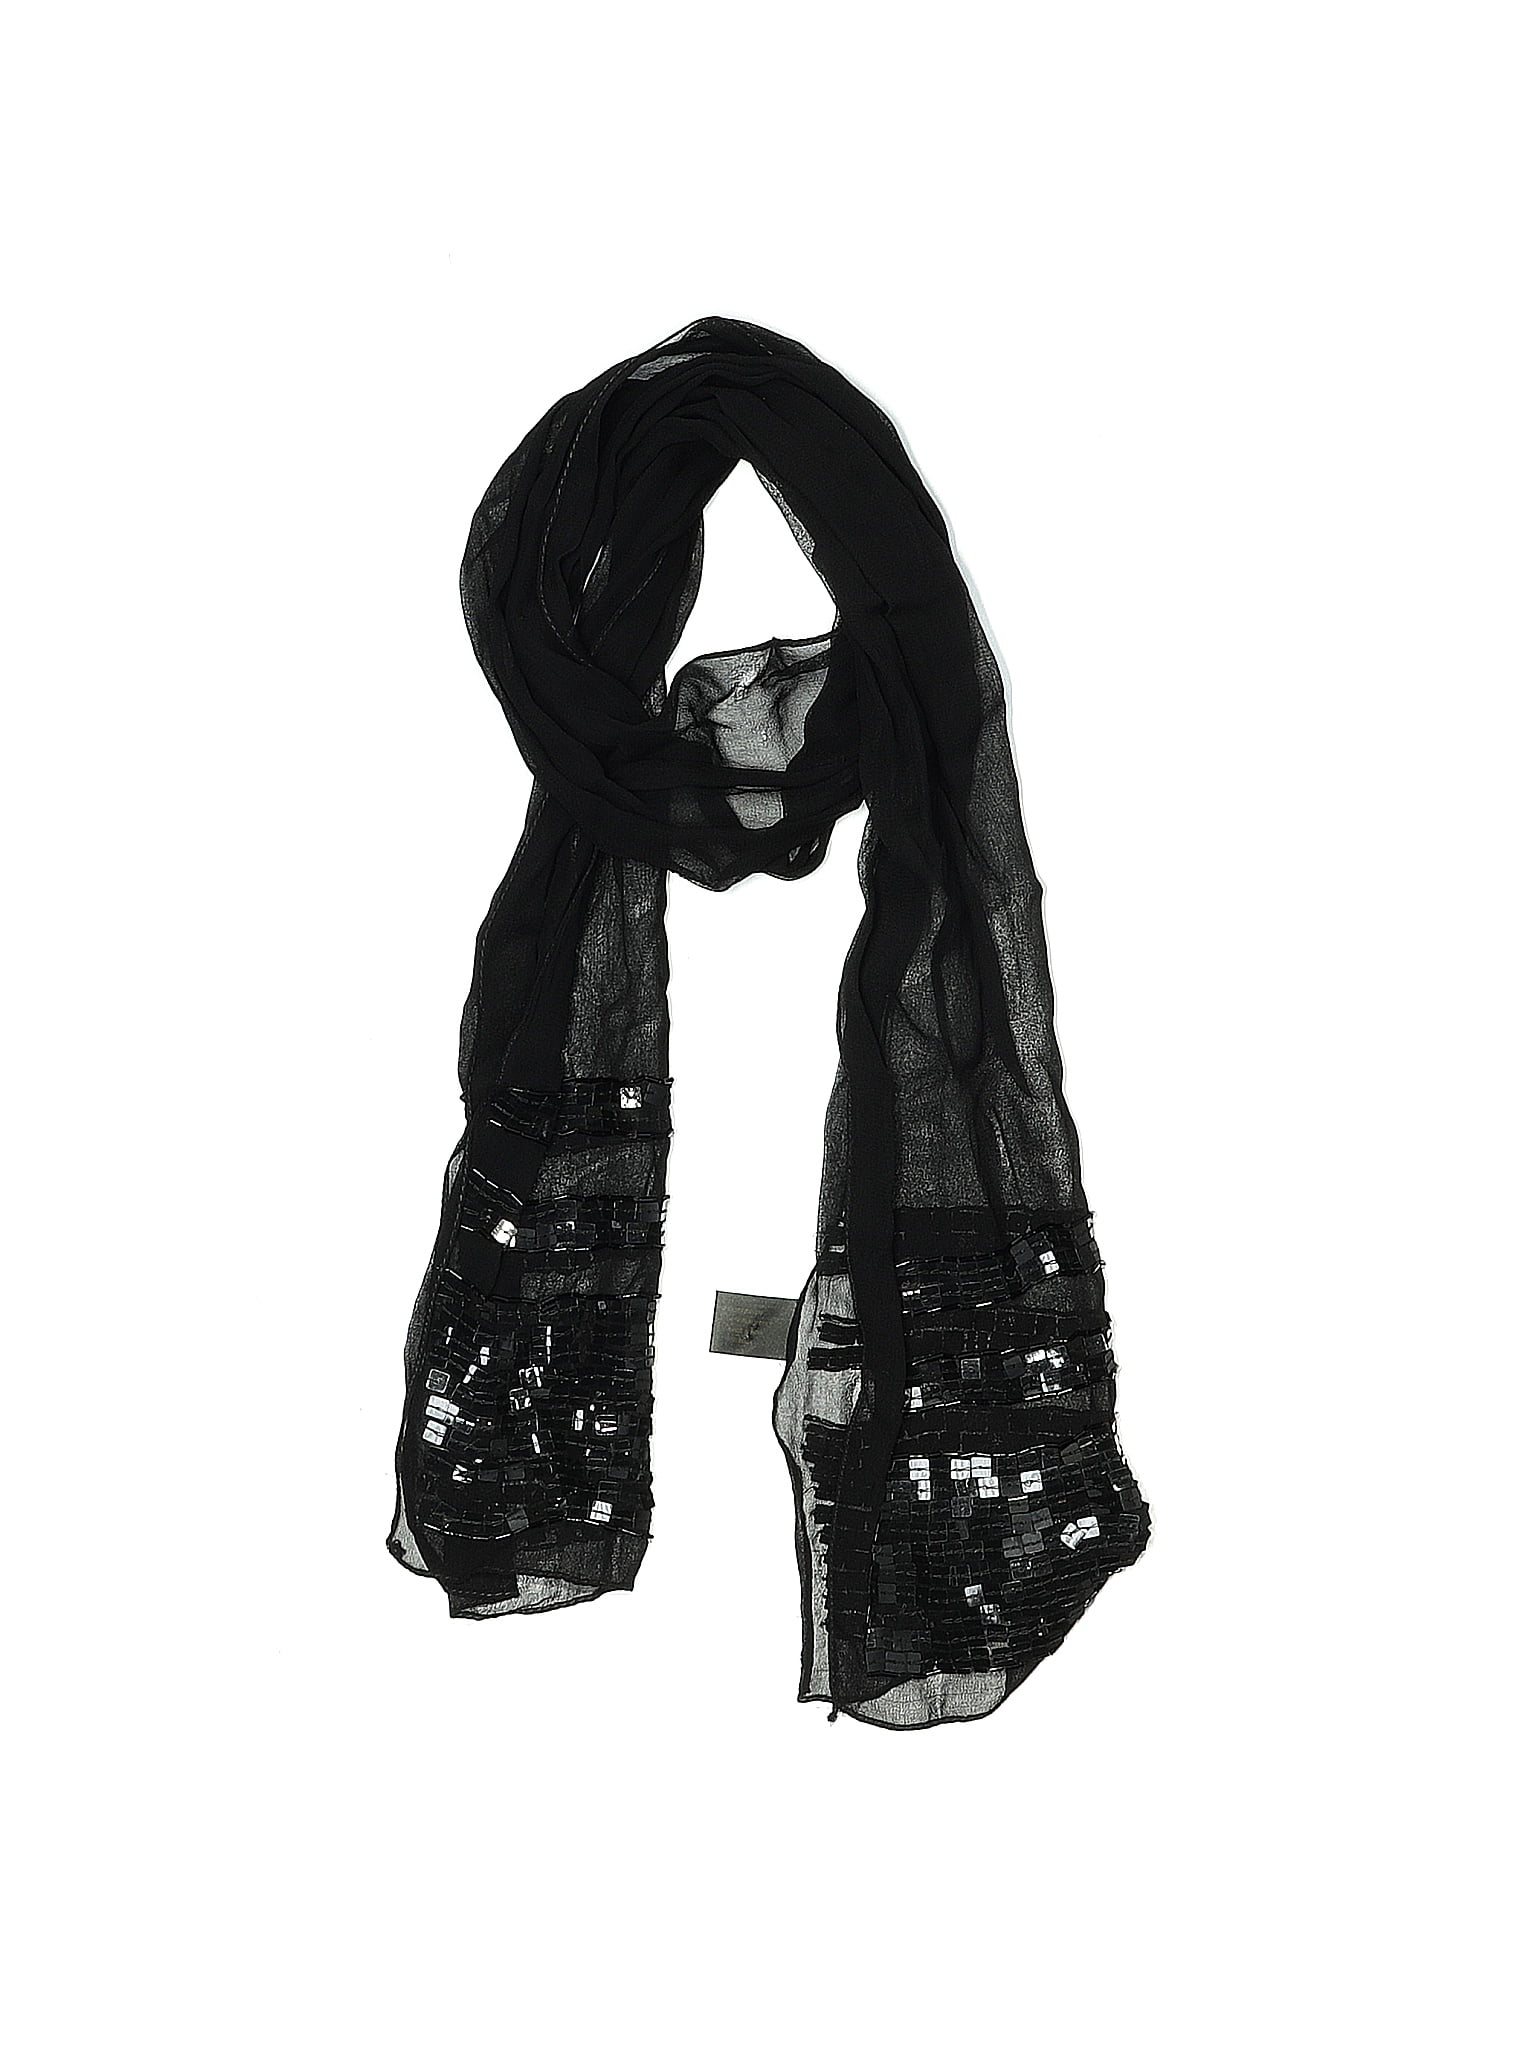 Lane Bryant 100% Rayon Solid Black Scarf One Size (Plus) - 63% off ...